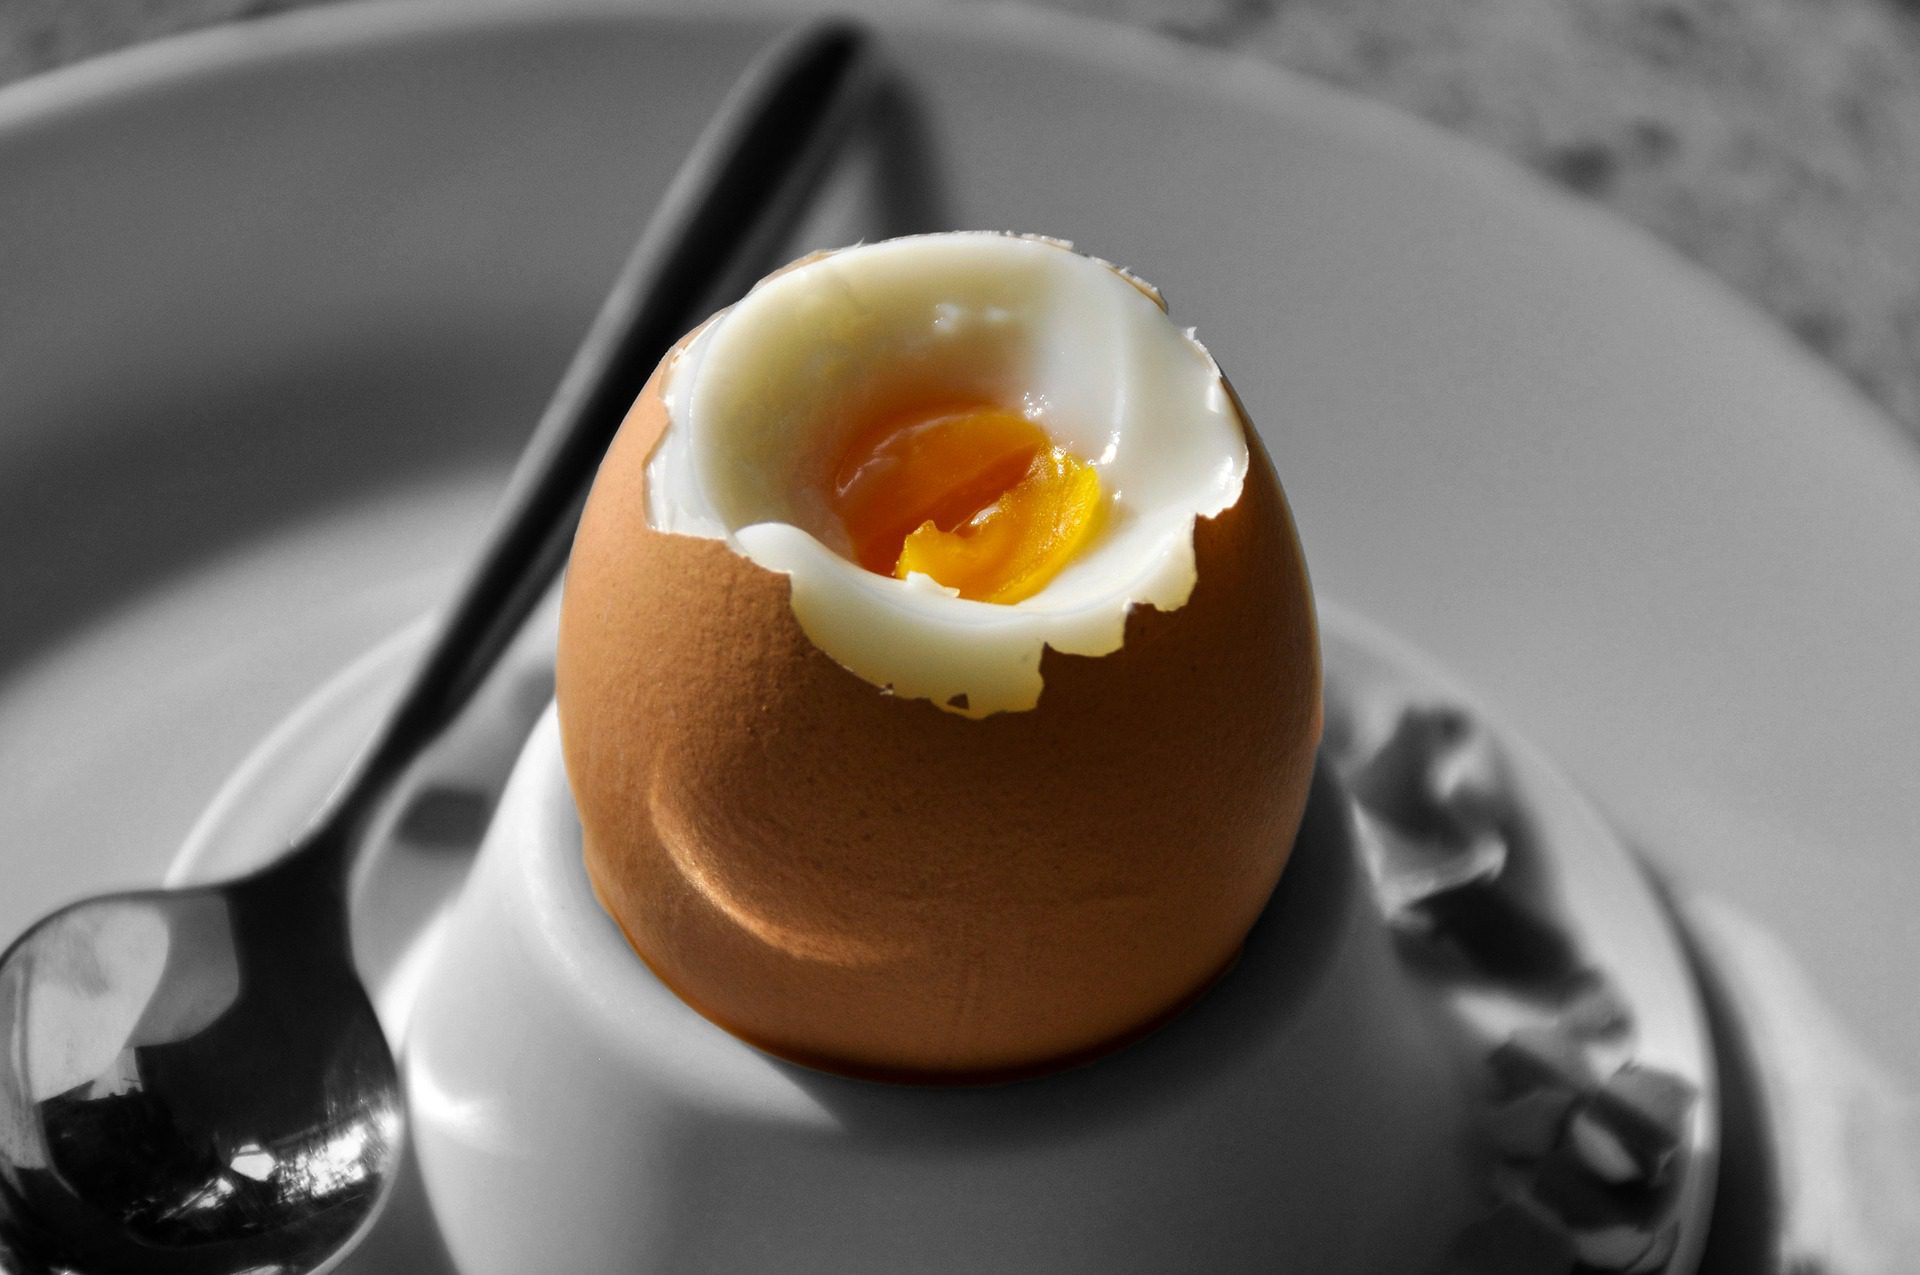 cracking in to a boiled egg for breakfast